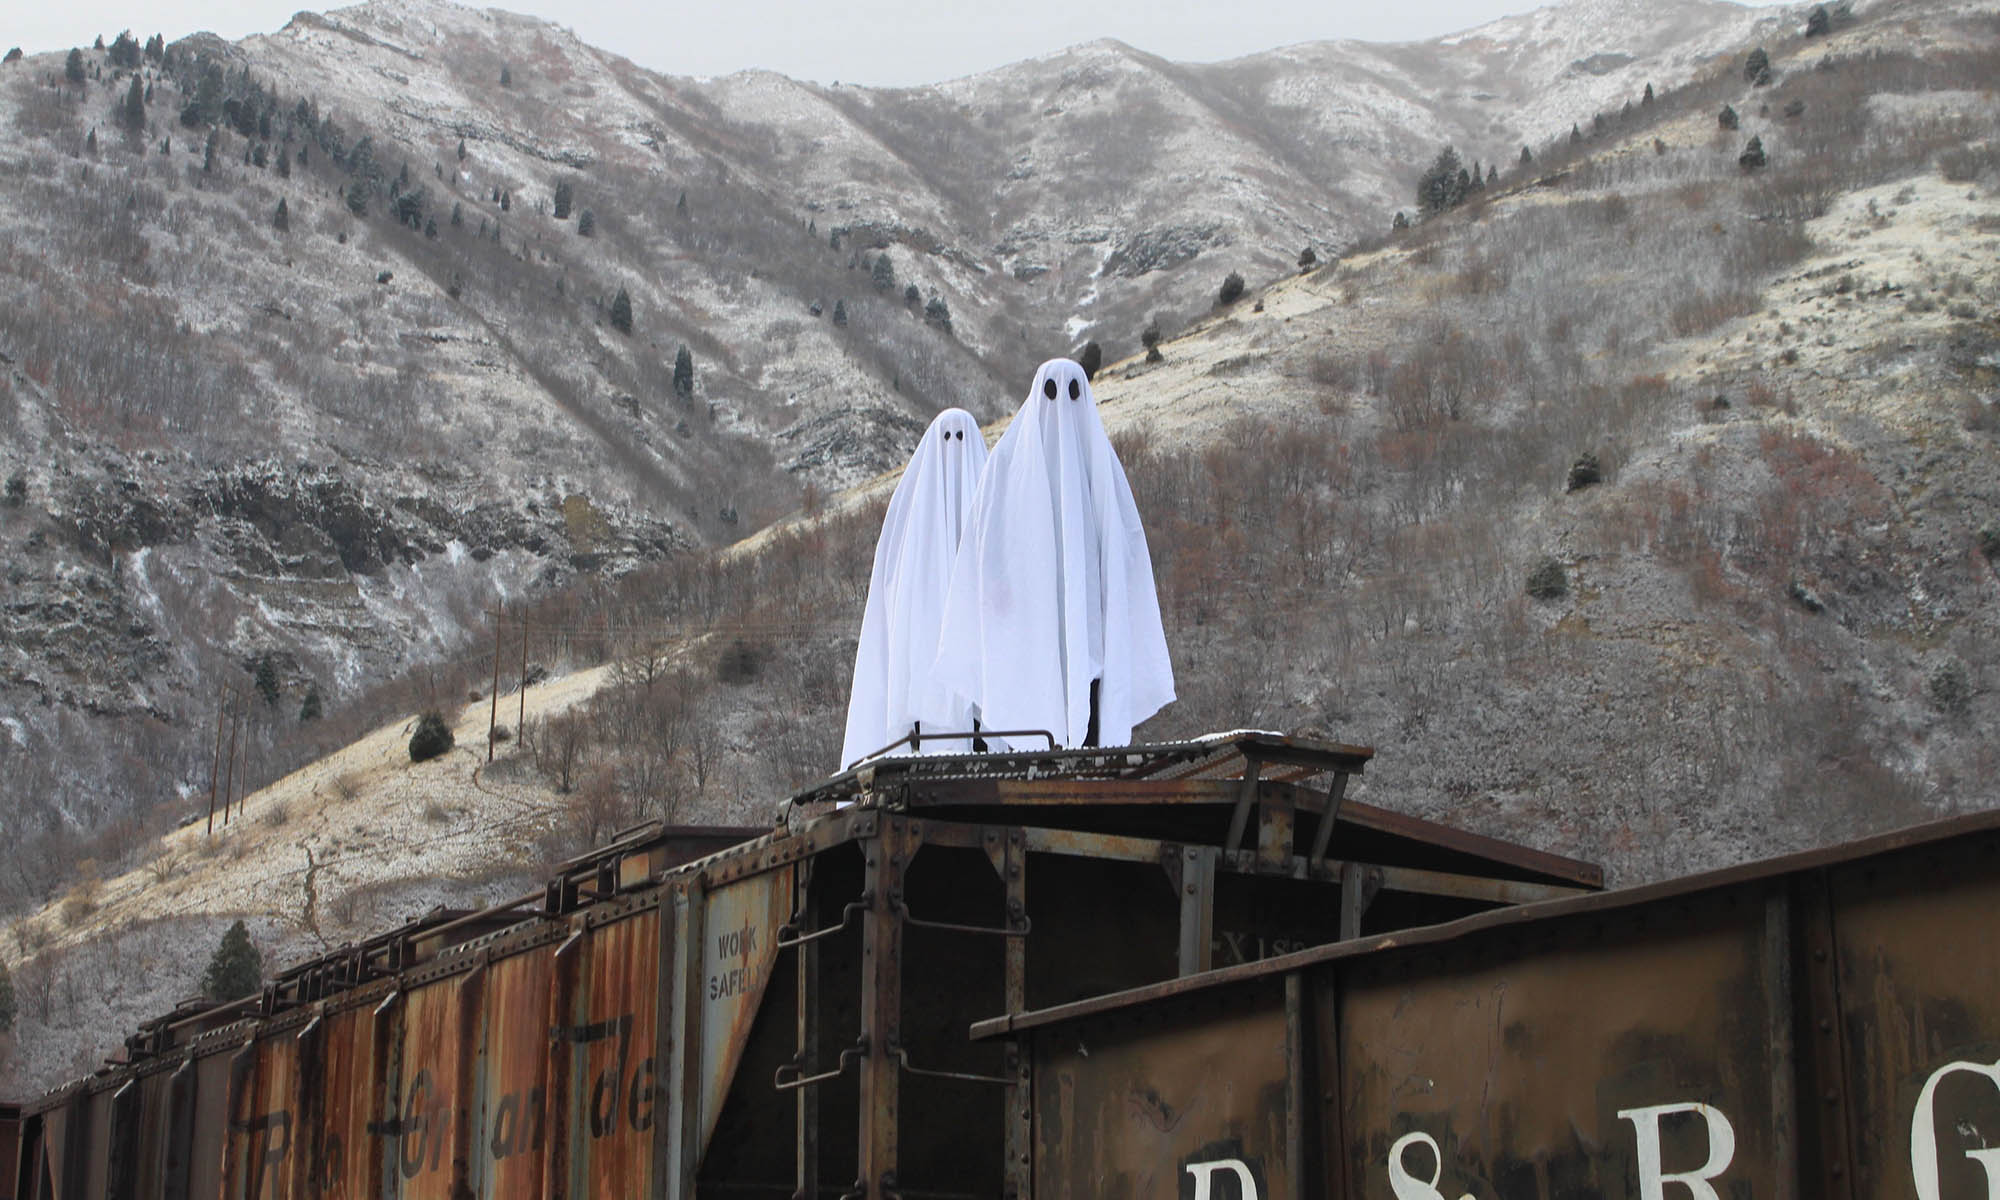 ghost costumes